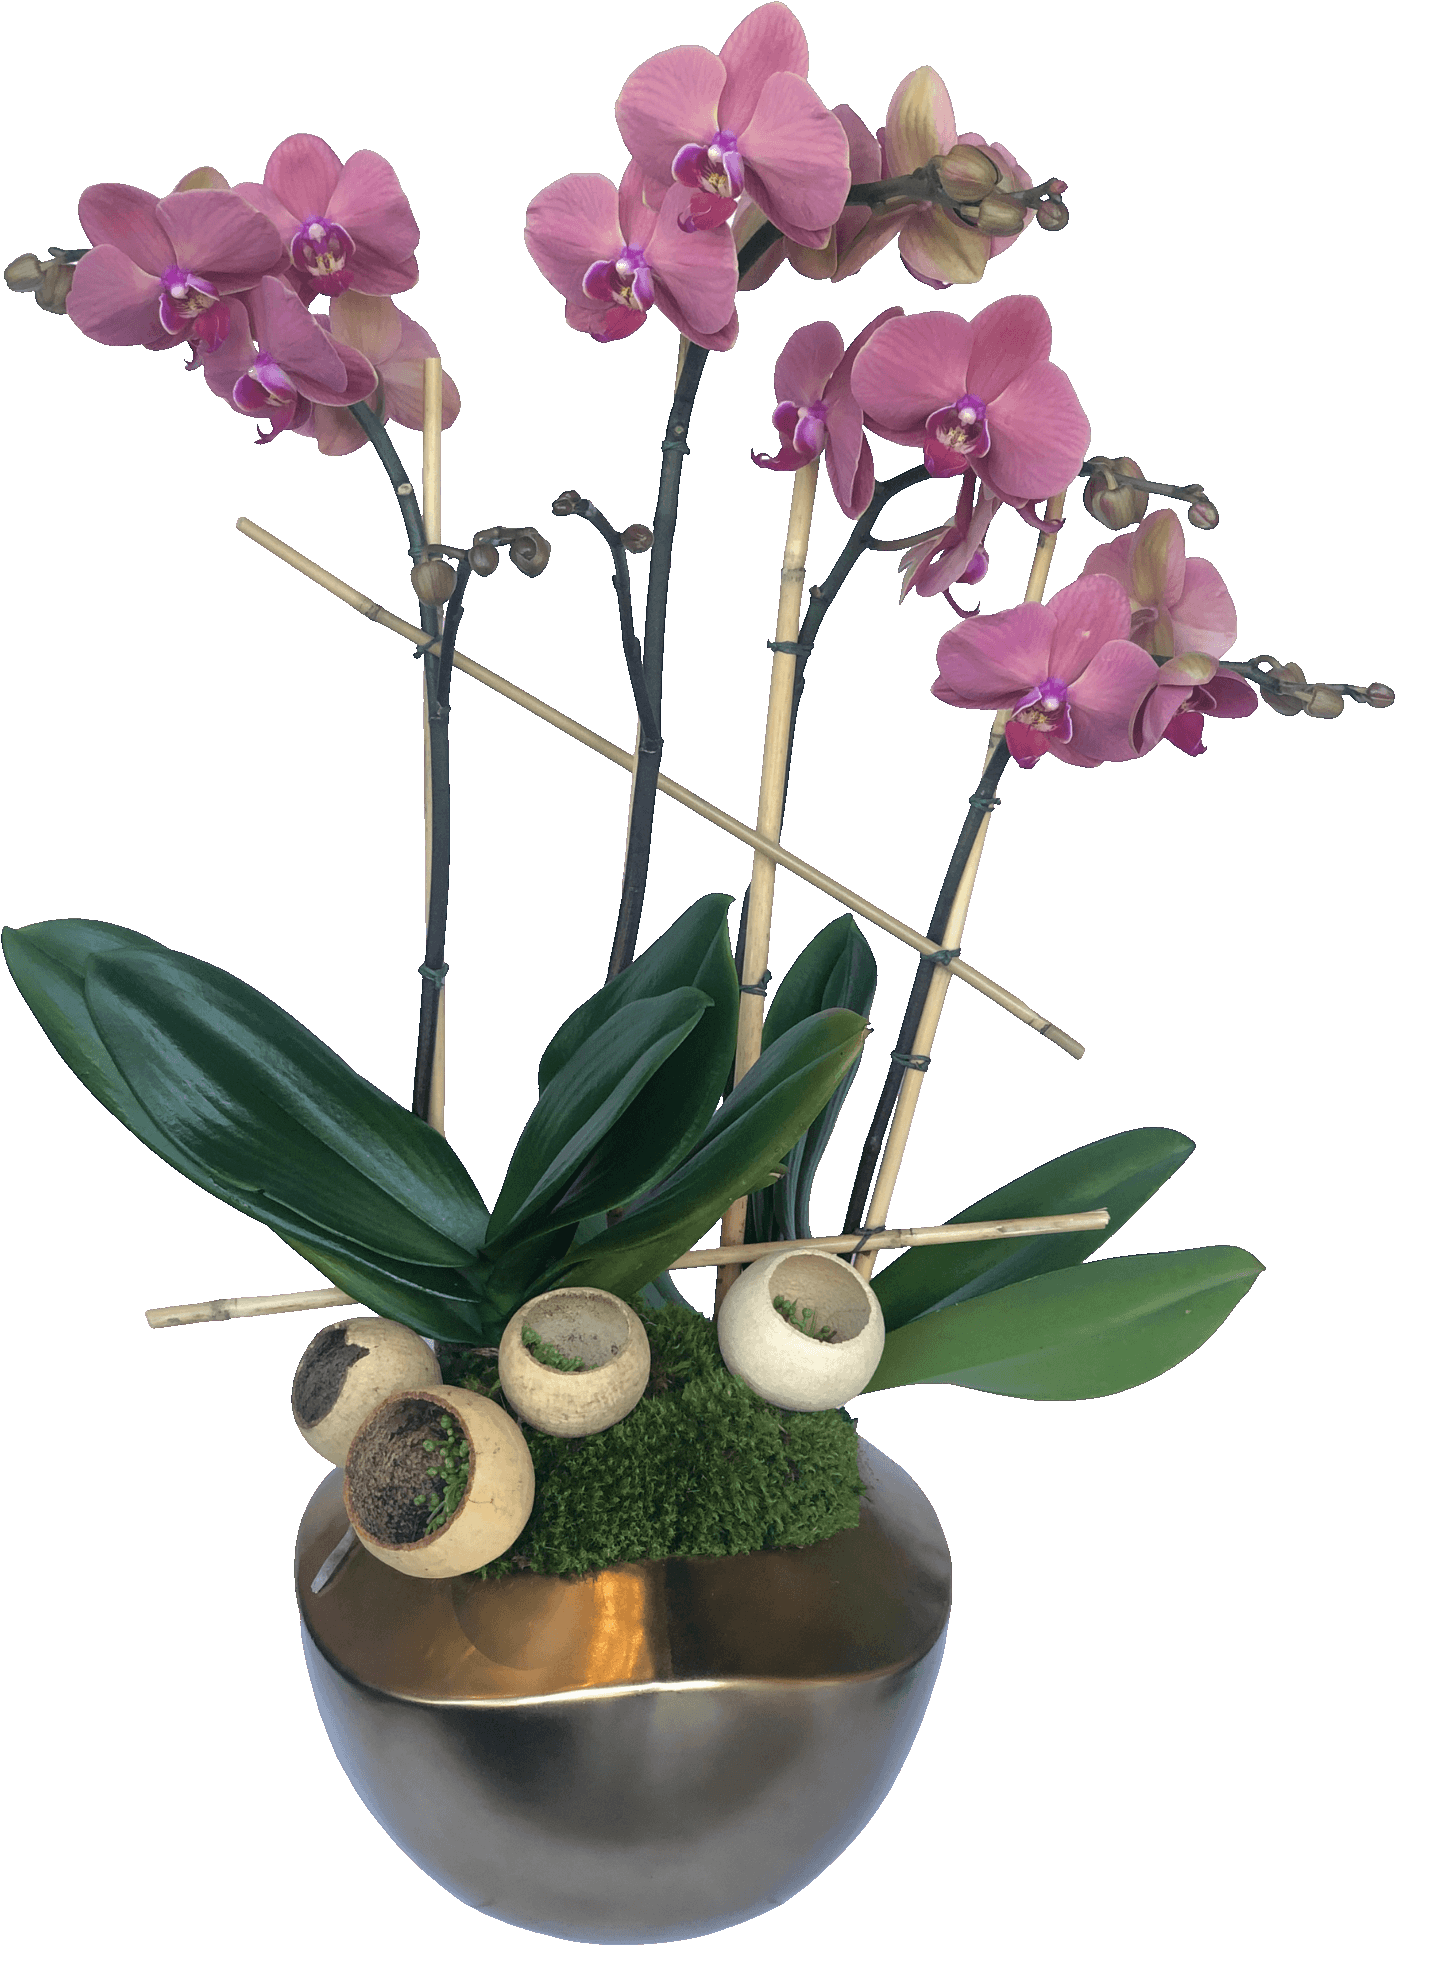 Four stems of fresh phalaenopsis orchid plants with bamboo